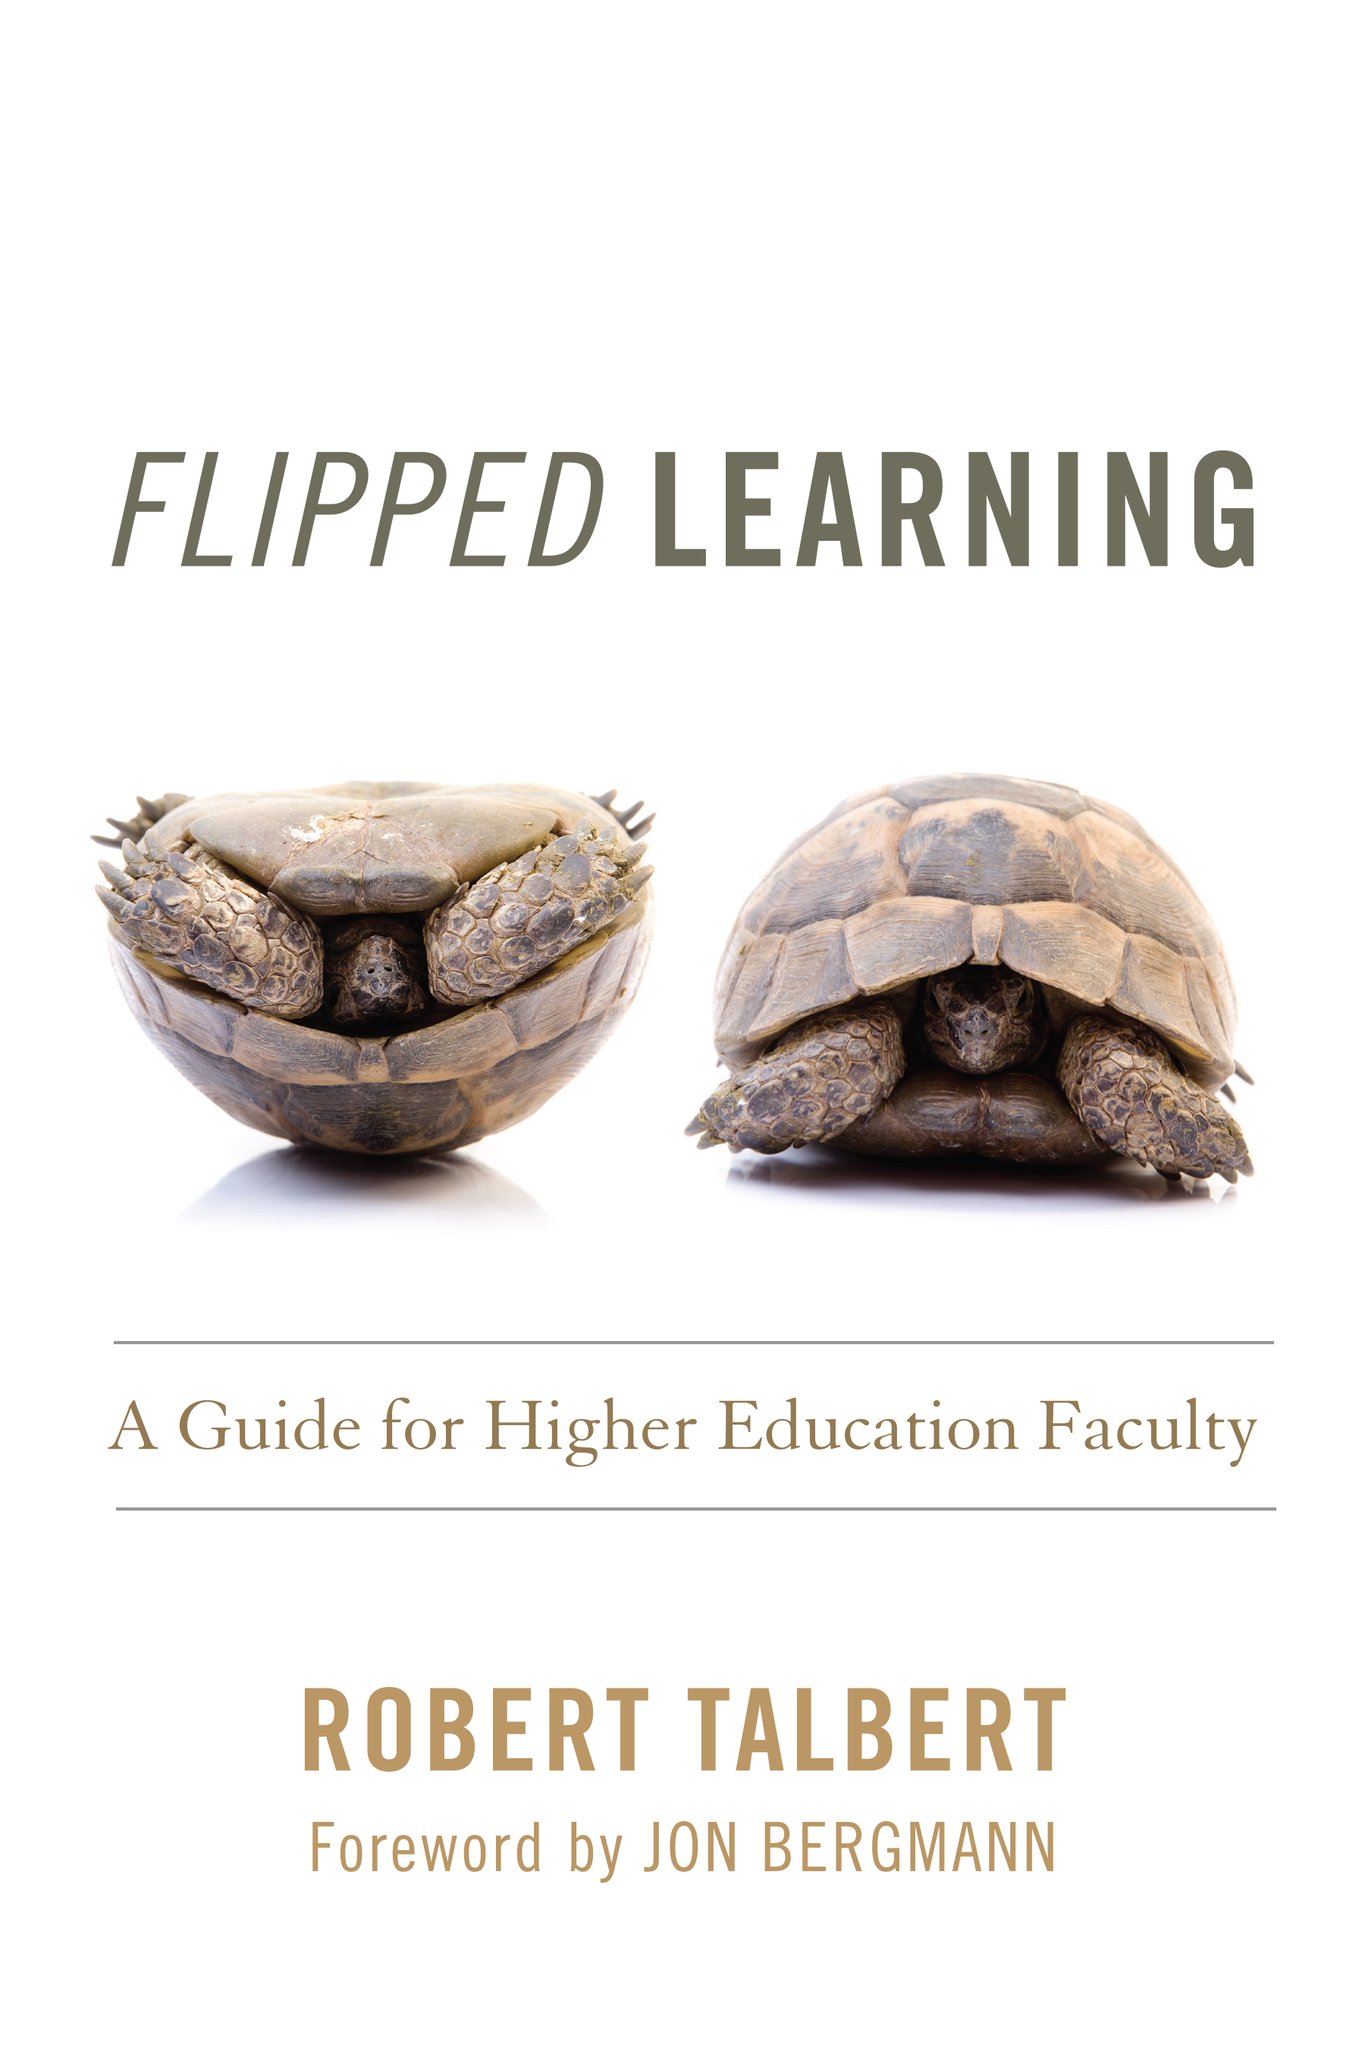 #LTHEchat Everyone before I forget and since @suebecks brought it up, I have a book out on flipped learning: https://t.co/mdkImZ1Dzw https://t.co/Luy3palmZe